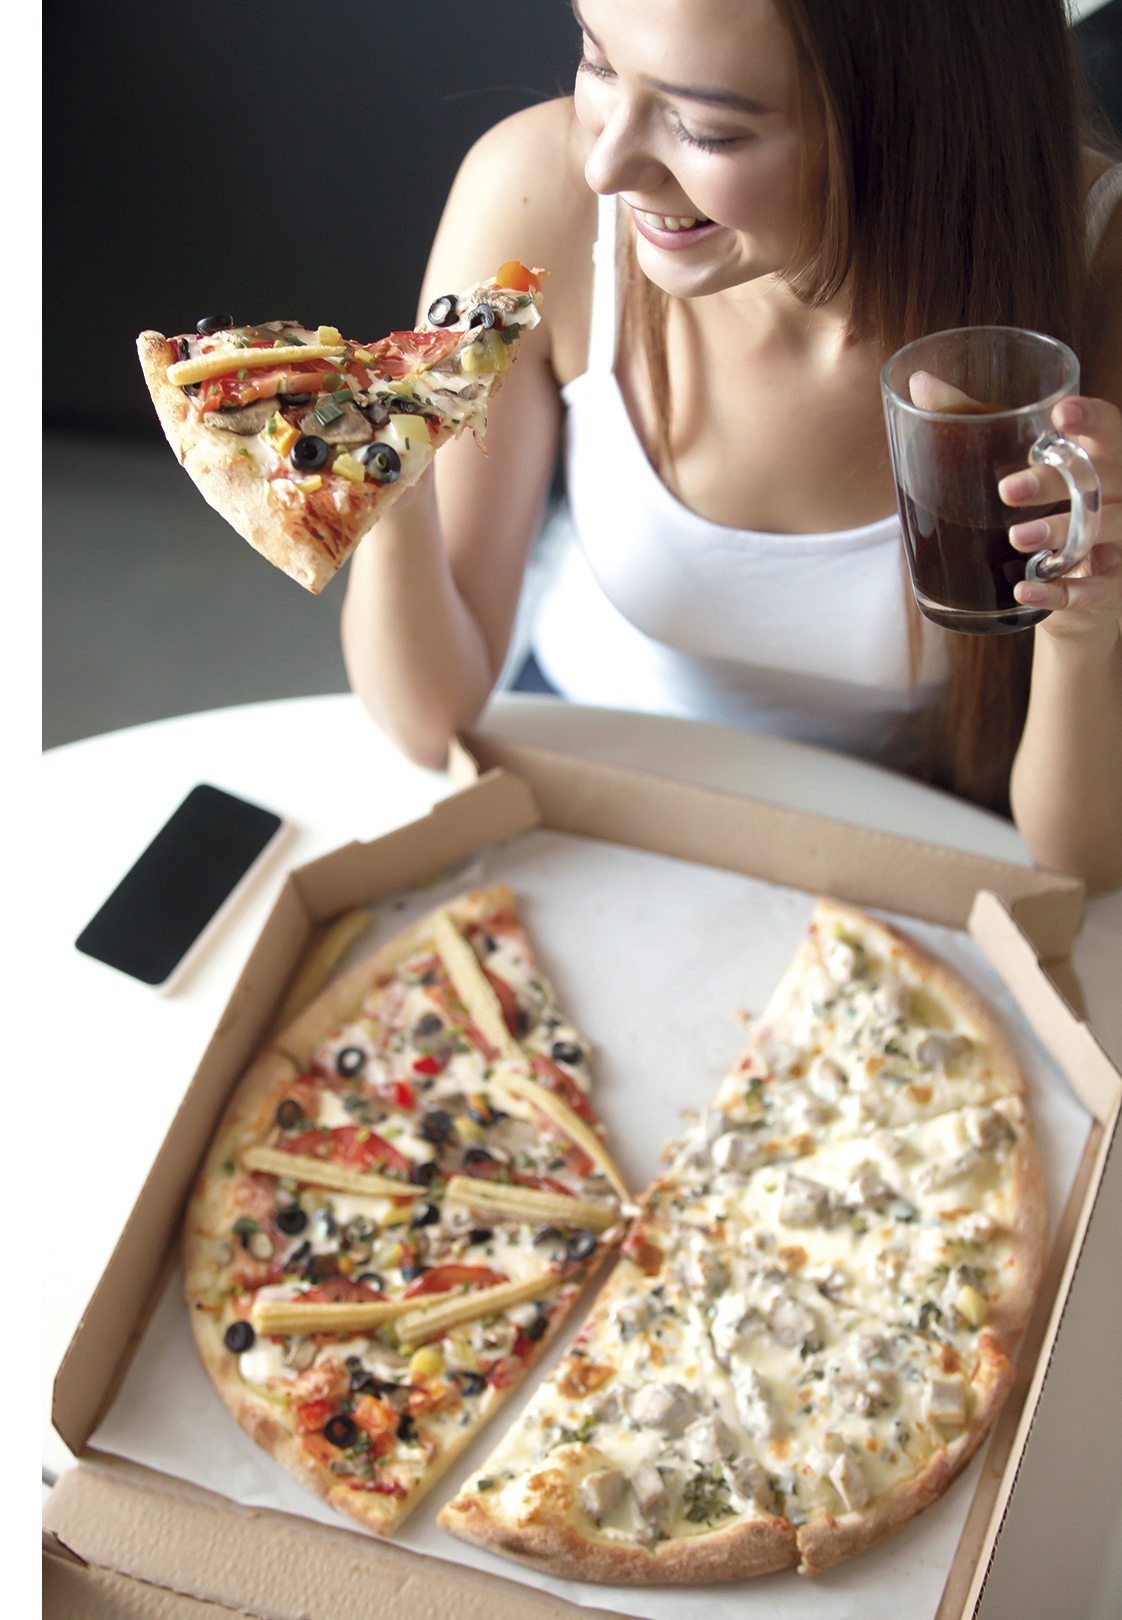 woman-with-pizza.jpg (1.18 MB)